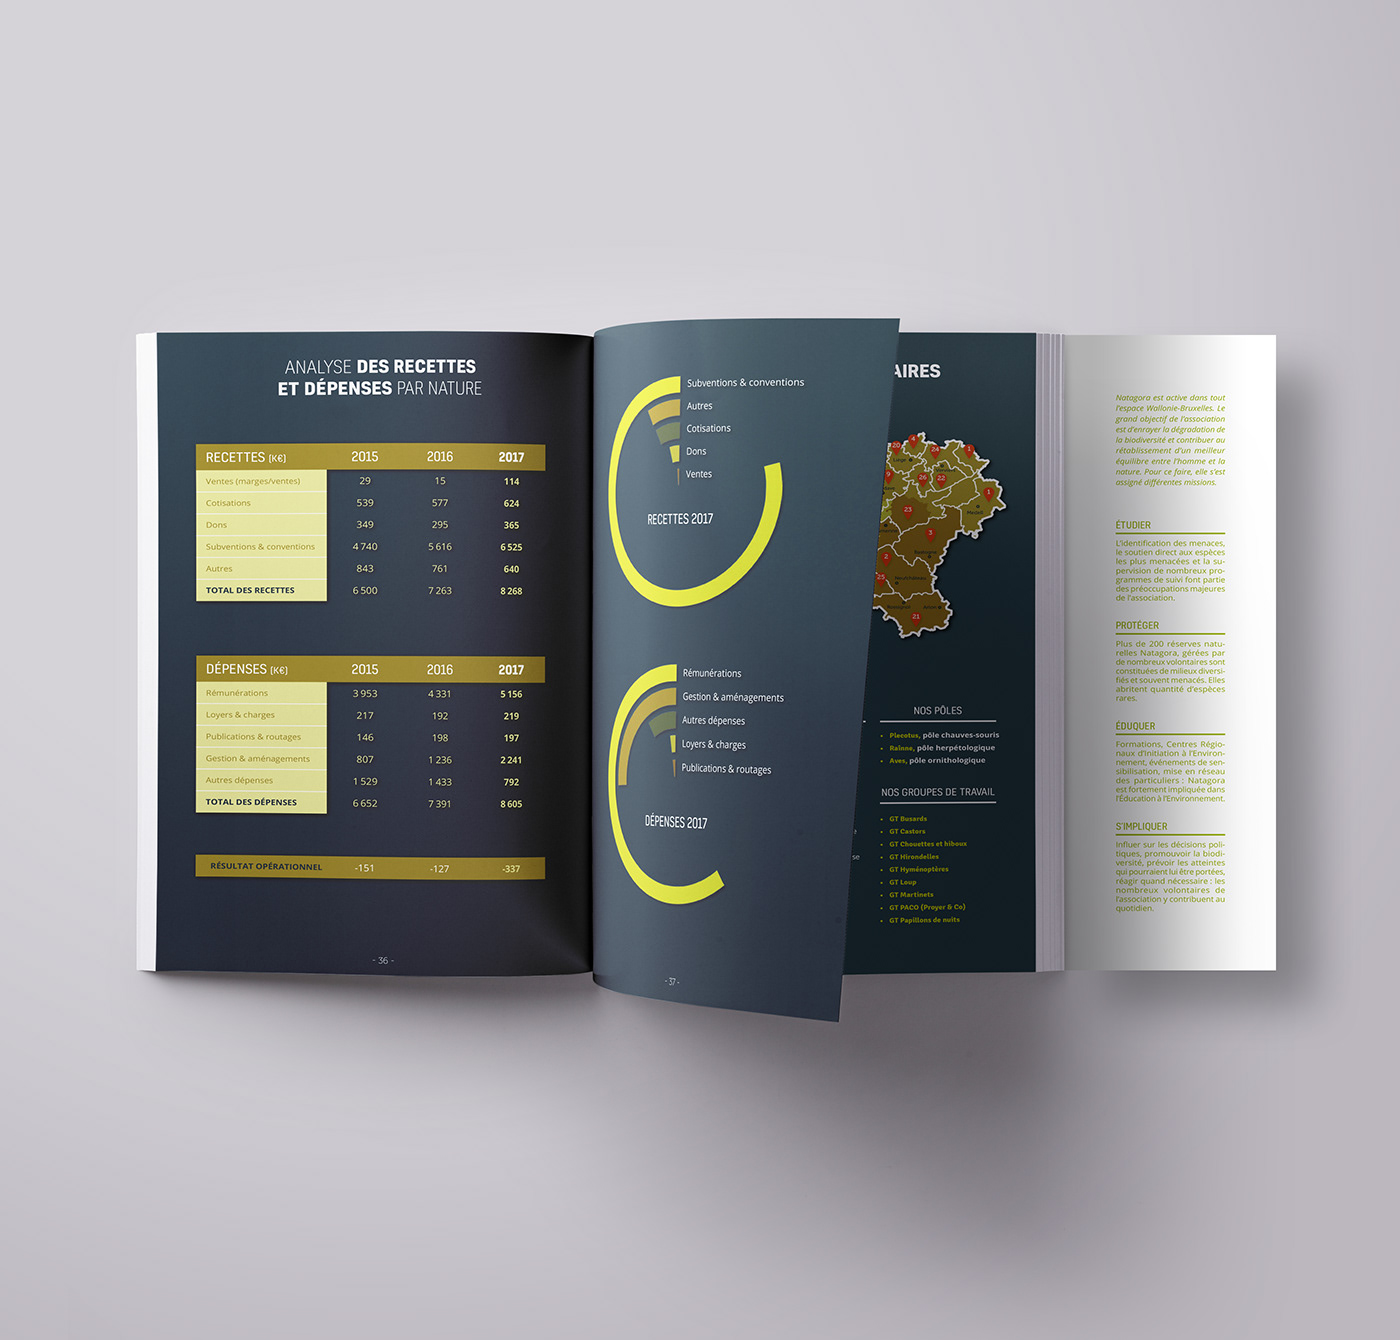 annual report butterfly corporate edition Layout mise en page Natagora Nature rapport annuel